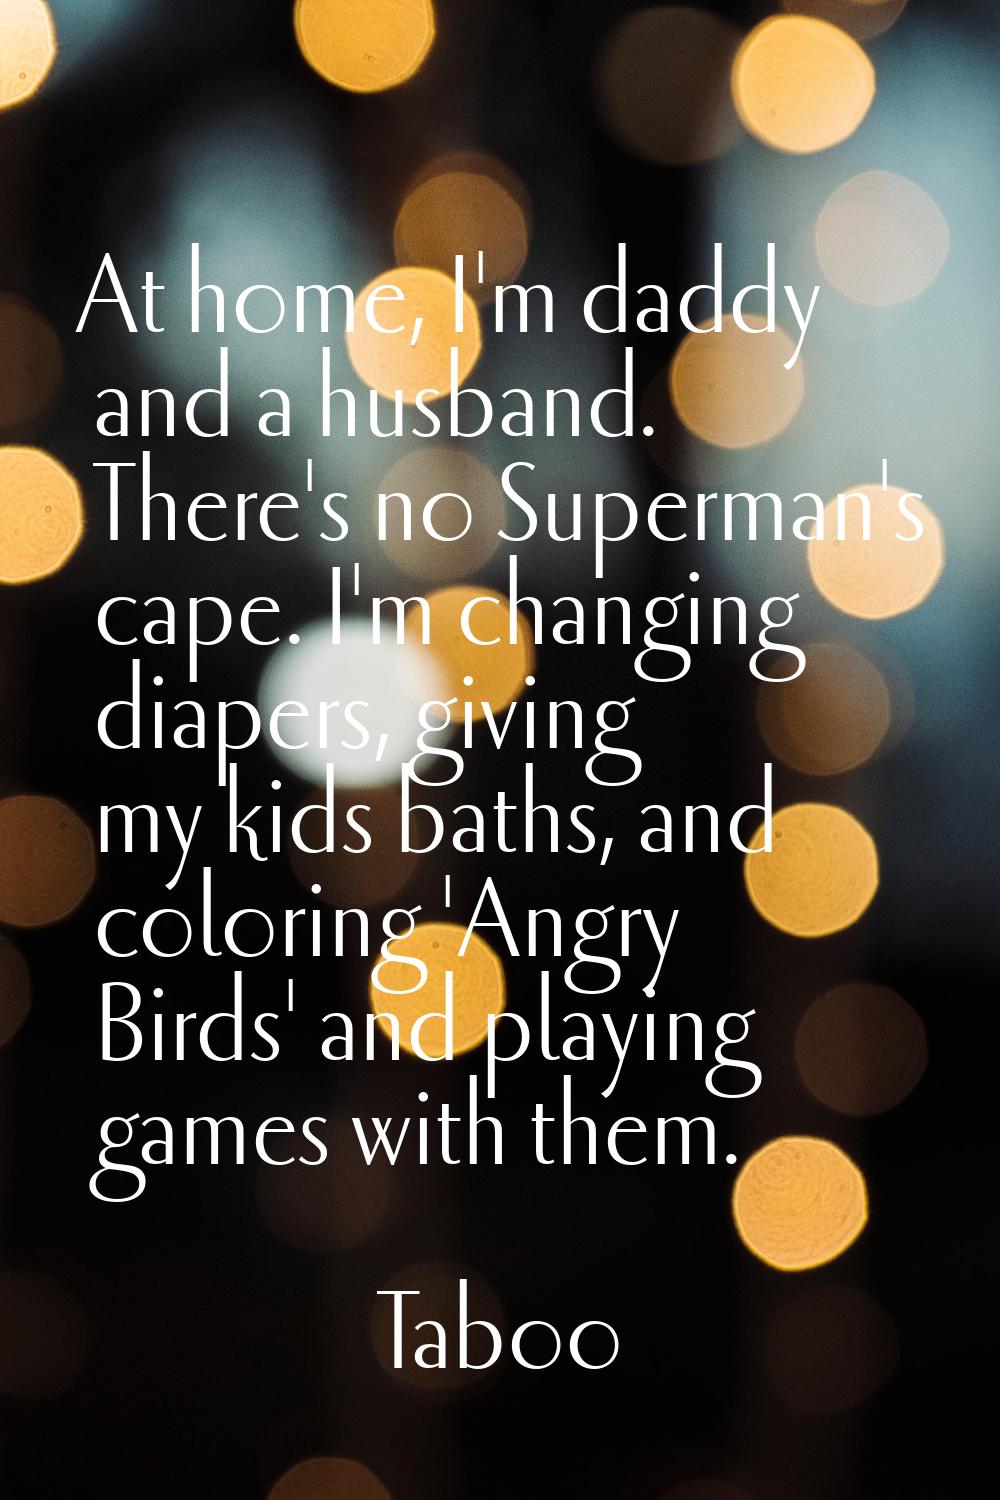 At home, I'm daddy and a husband. There's no Superman's cape. I'm changing diapers, giving my kids 